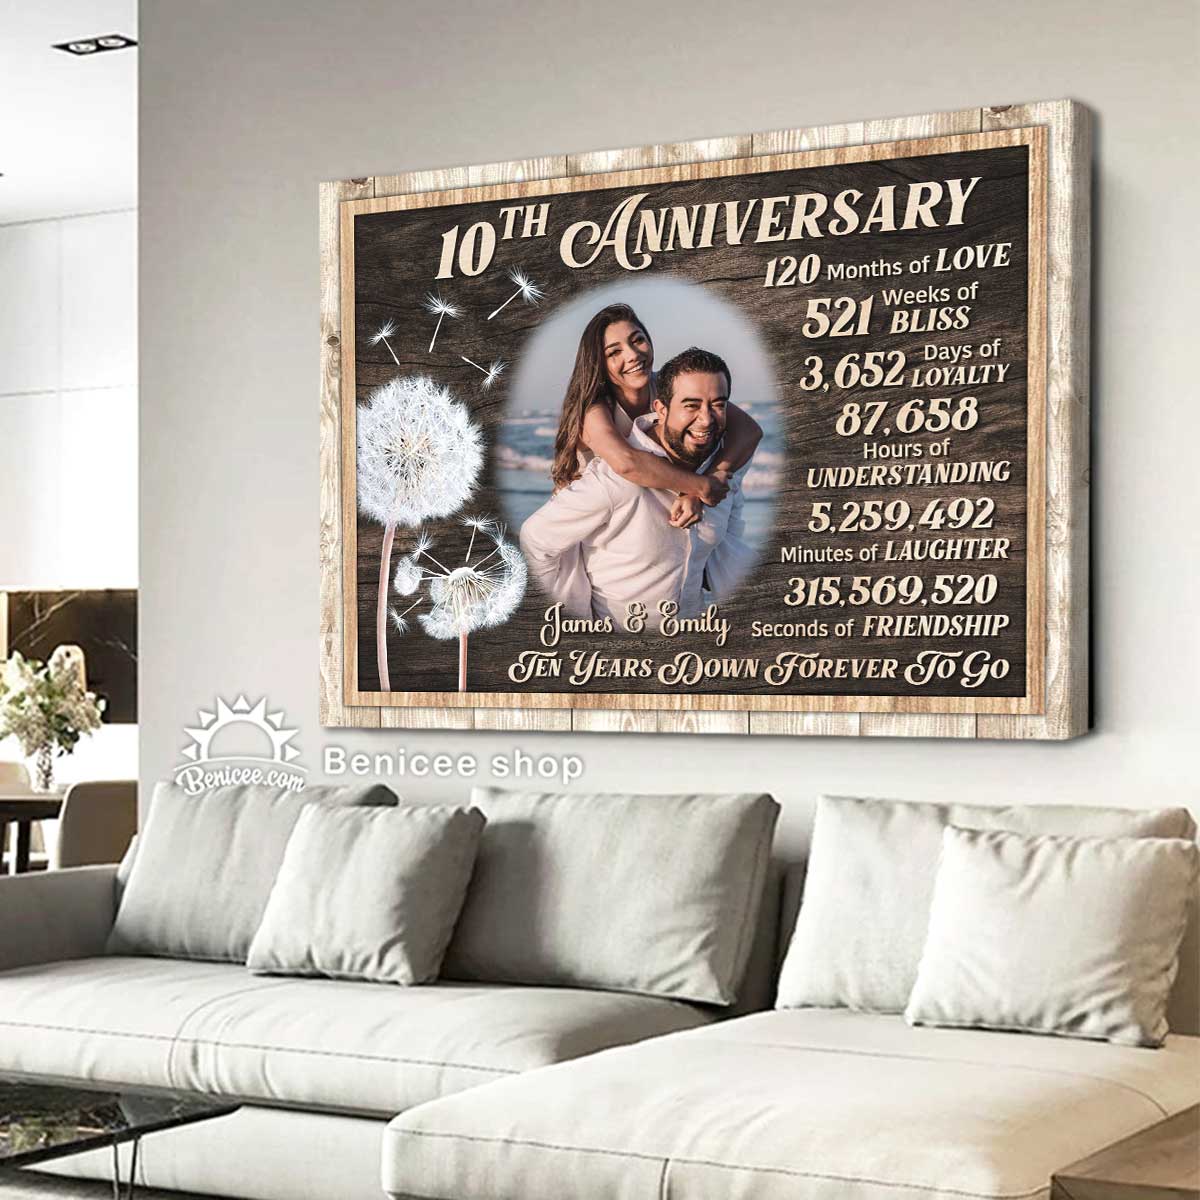 Wedding Anniversary Names by Year List and Gifts | Caketoppers-cheohanoi.vn